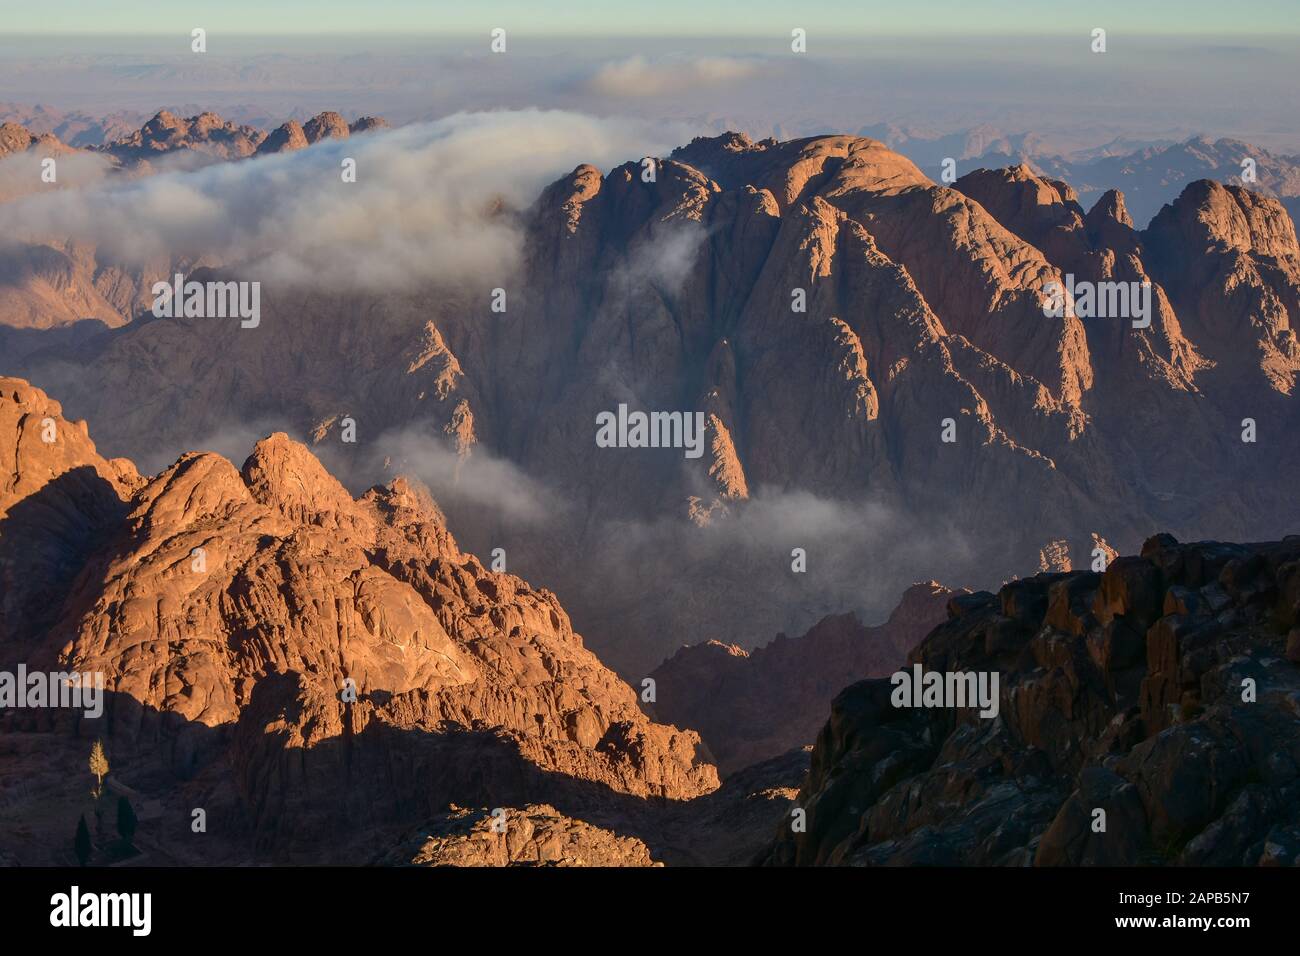 A great view from Mount Sinai, Egypt Stock Photo